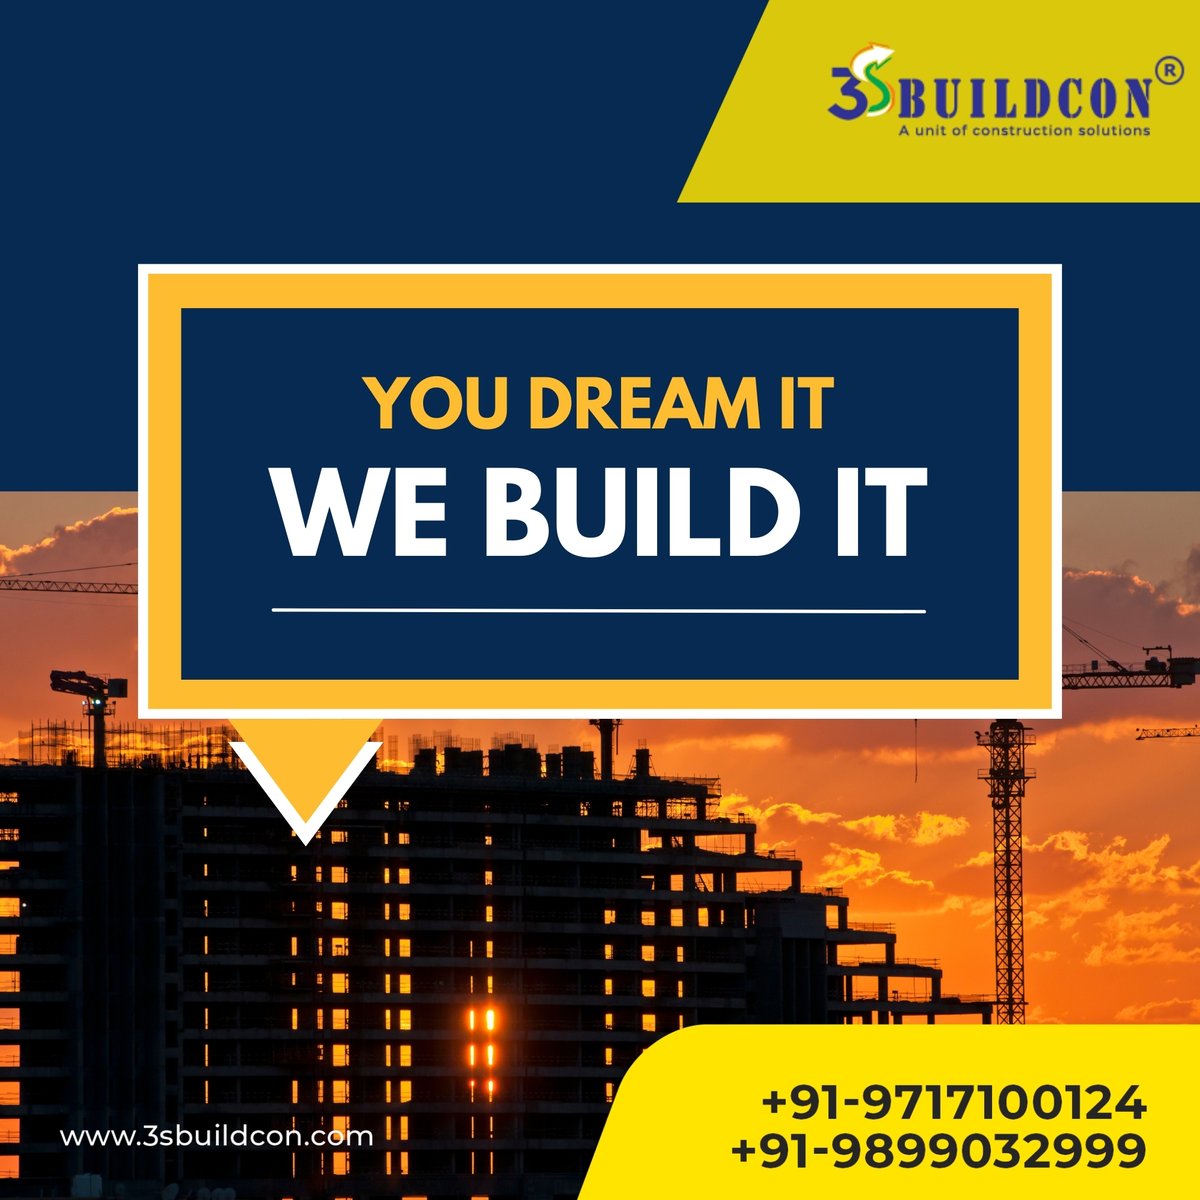 Dream big, because with us, 'You dream, we build it!' Our team is dedicated to turning your vision into reality. Let's create something amazing together. 

#DreamBig #CustomDesigns #InnovationUnleashed #YourVisionOurMission